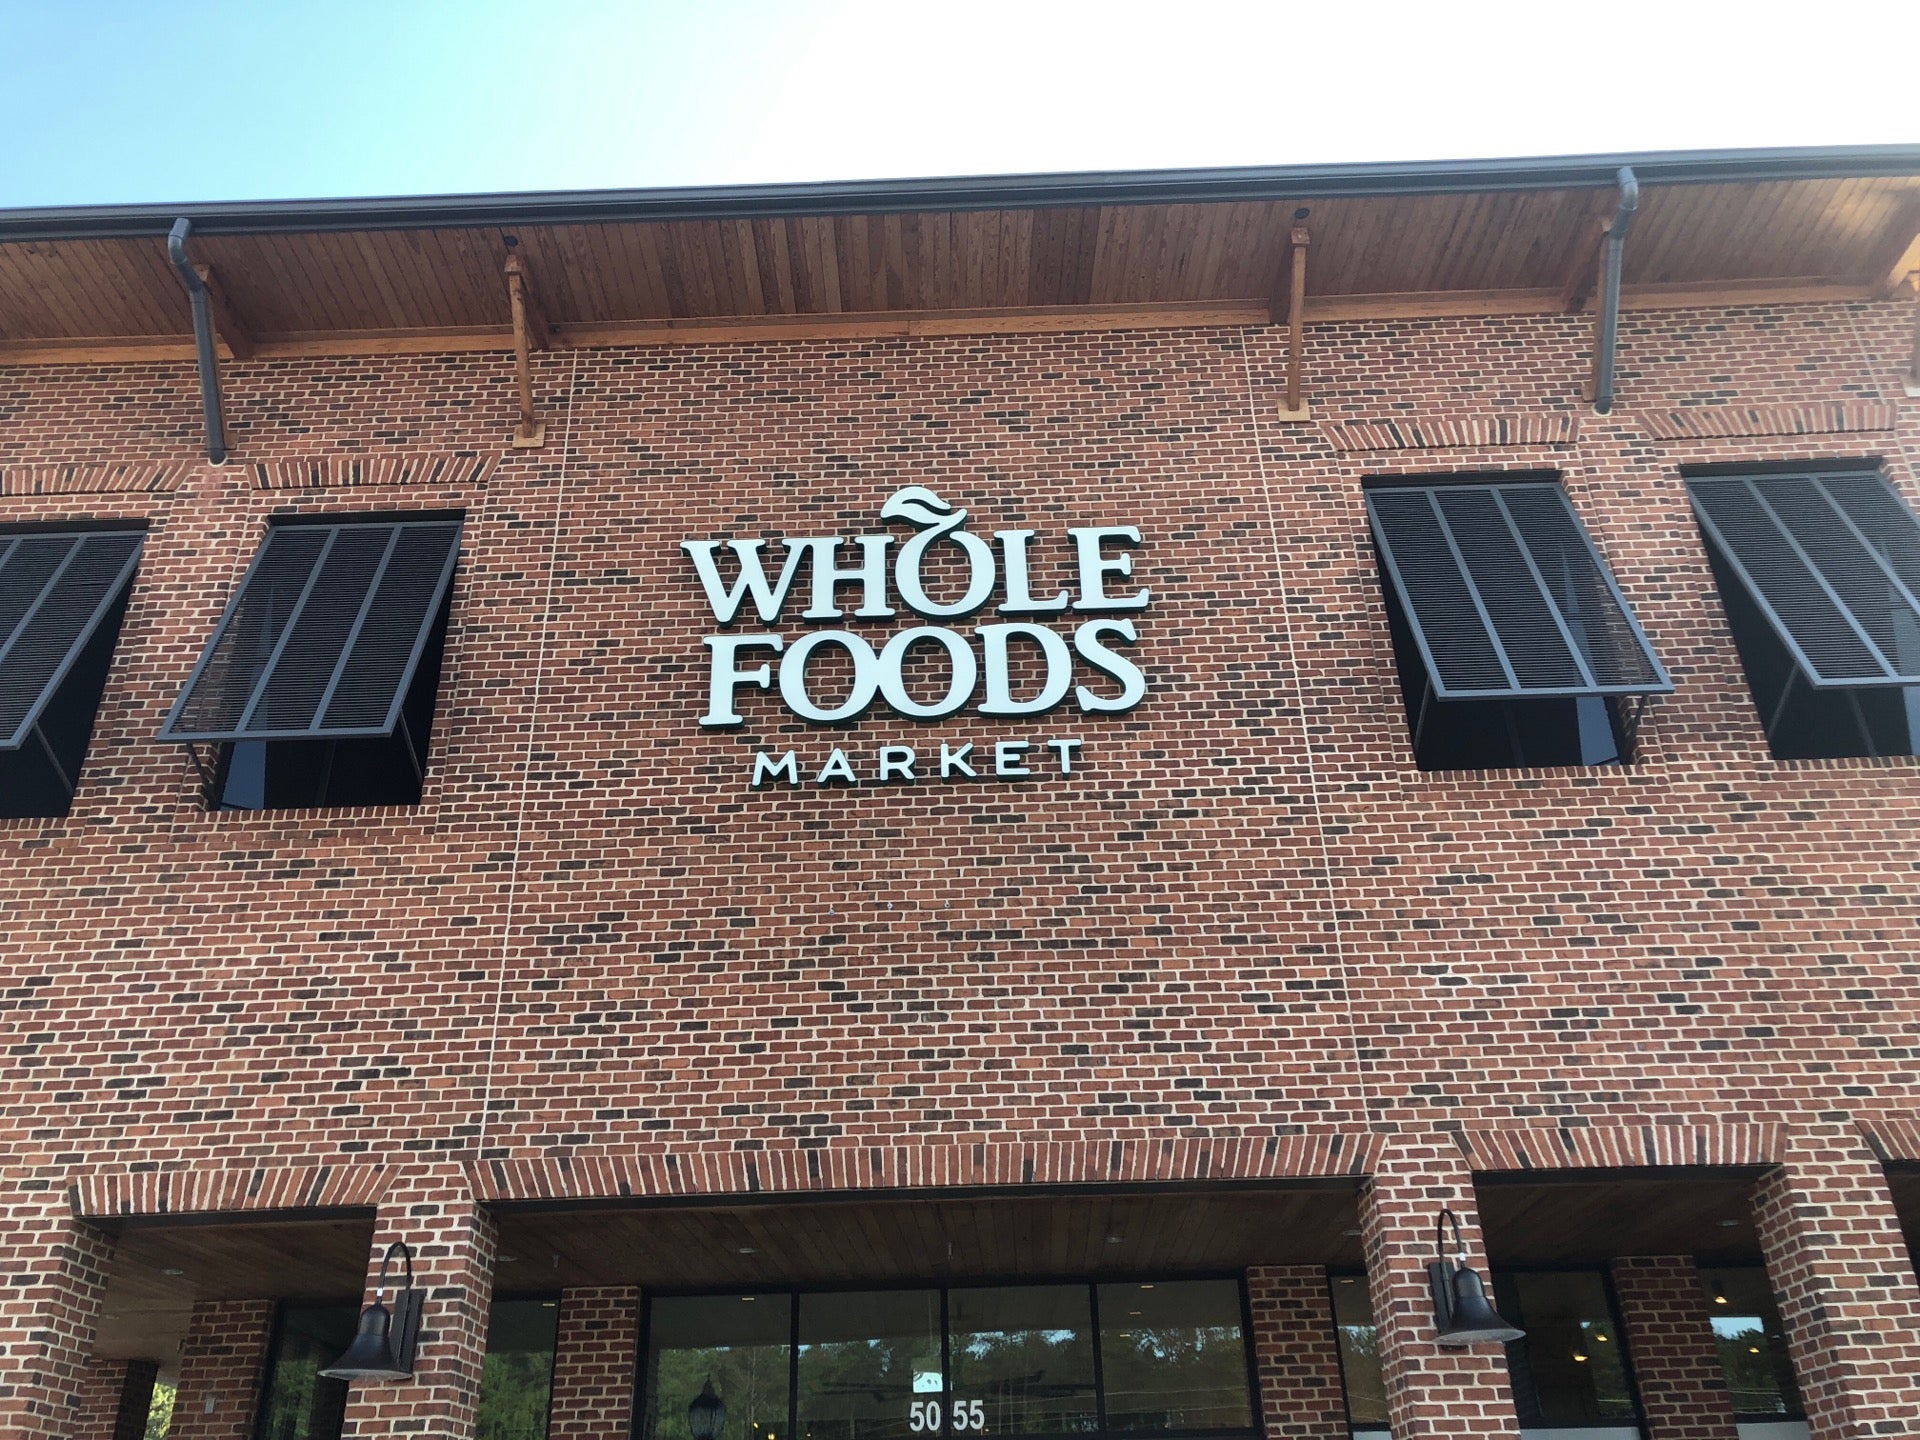 Whole Foods Grand Opening - West Cary, NC - Blue Skies for Me Please